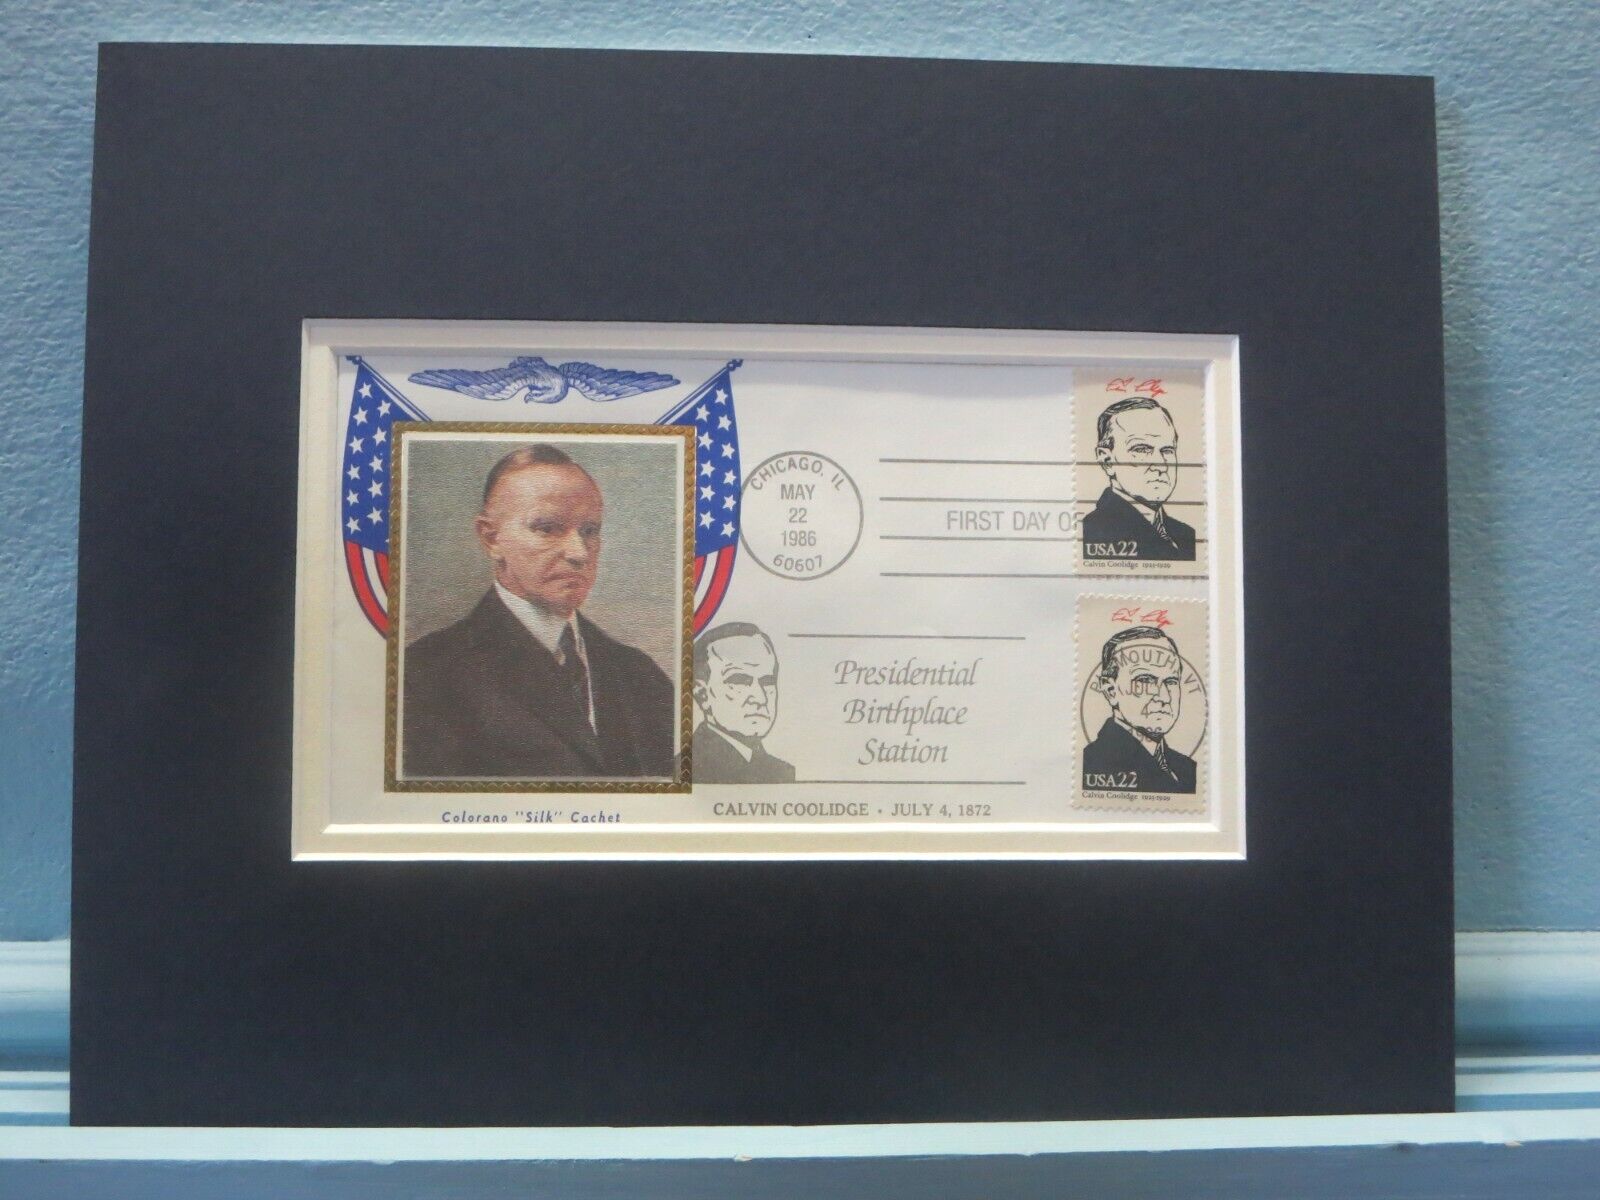 President Calvin Coolidge honored by the First day Cover of his own stamp